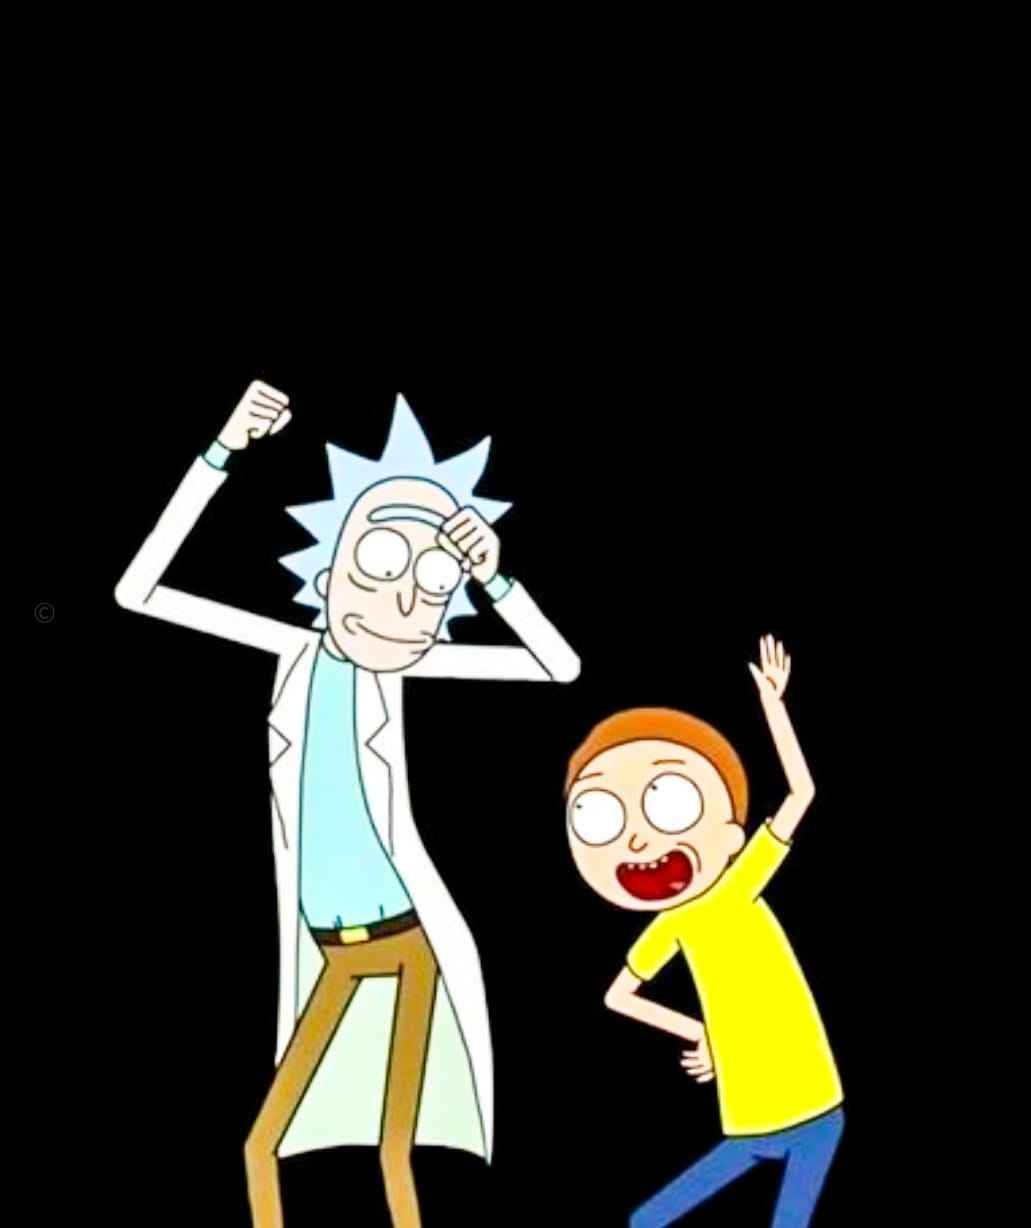 100+] Rick And Morty Phone Wallpapers